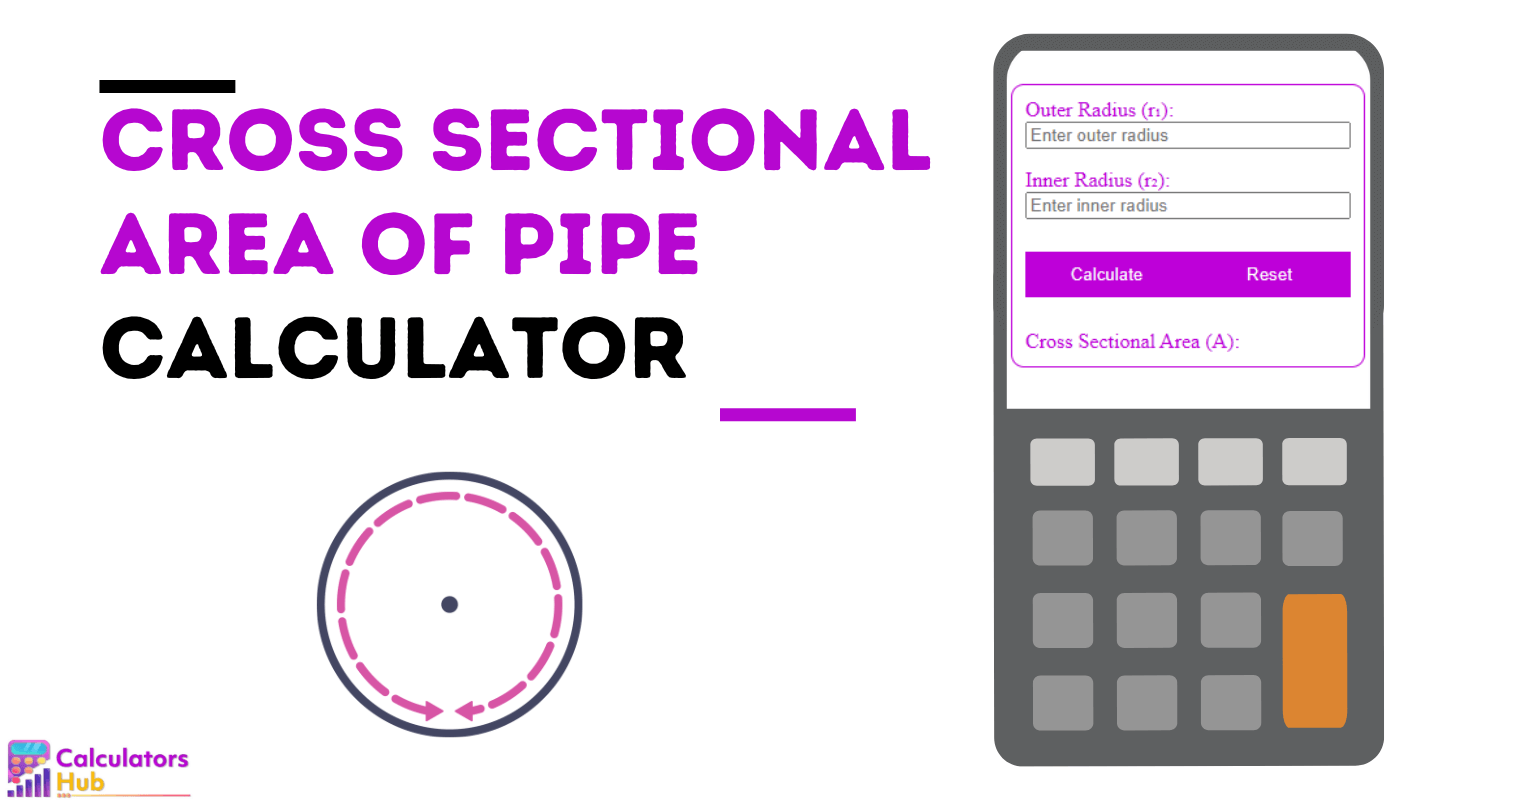 Cross Sectional Area of Pipe Calculator